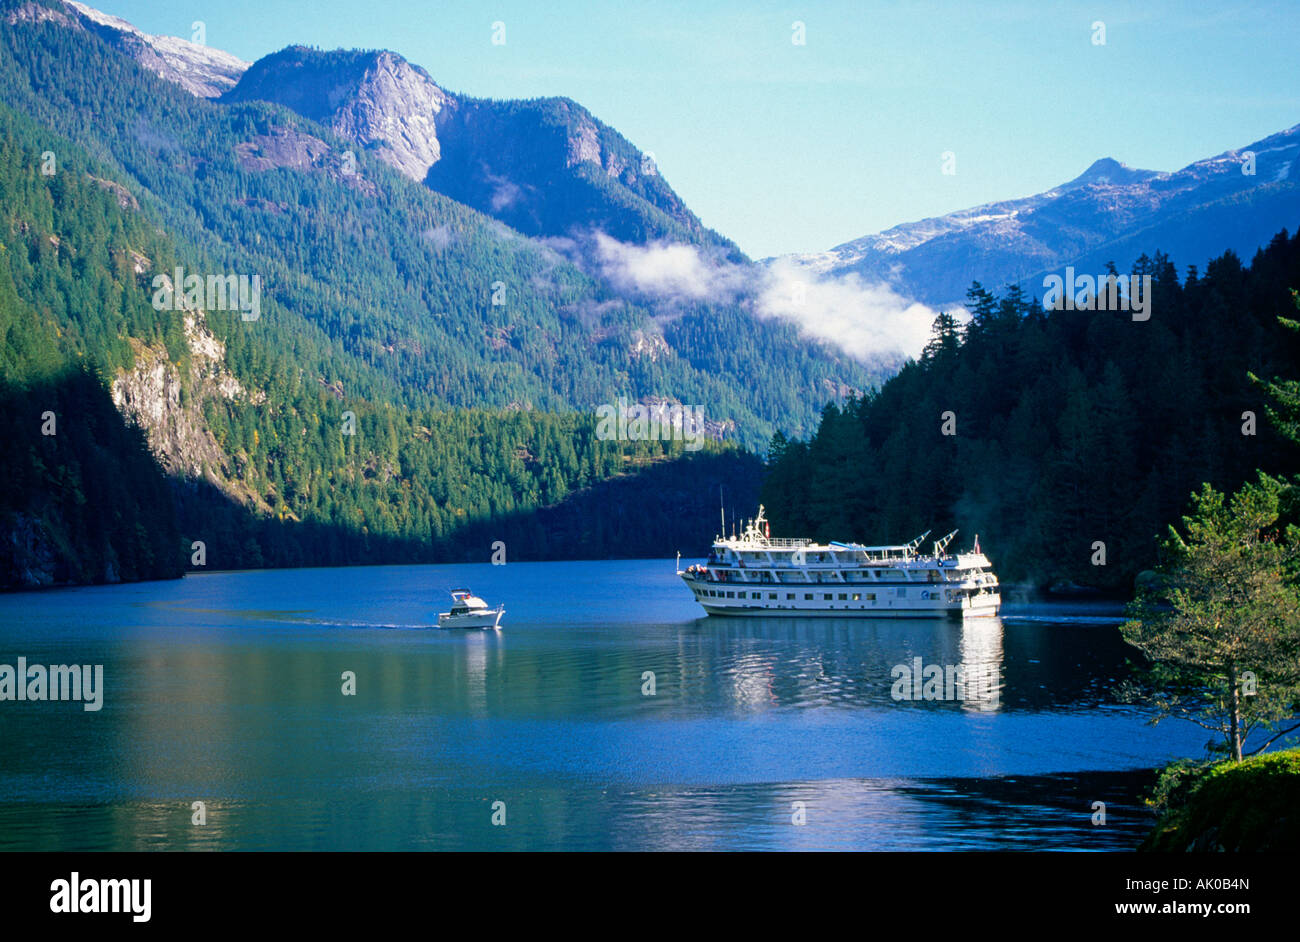 A small cruise ship navigates the waters of Princess Louisa Inlet the Inside Passage in British Columbia Stock Photo